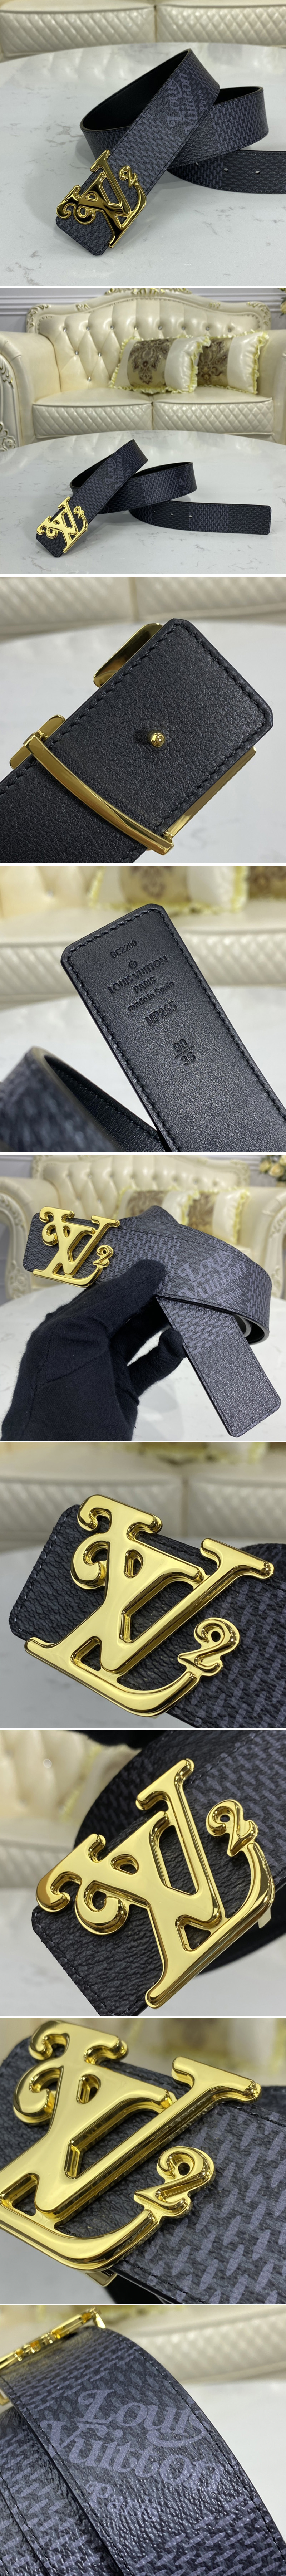 Replica Louis Vuitton MP255V LV Squared LV 40mm reversible belt in Damier Graphite Canvas/Black With Gold Buckle